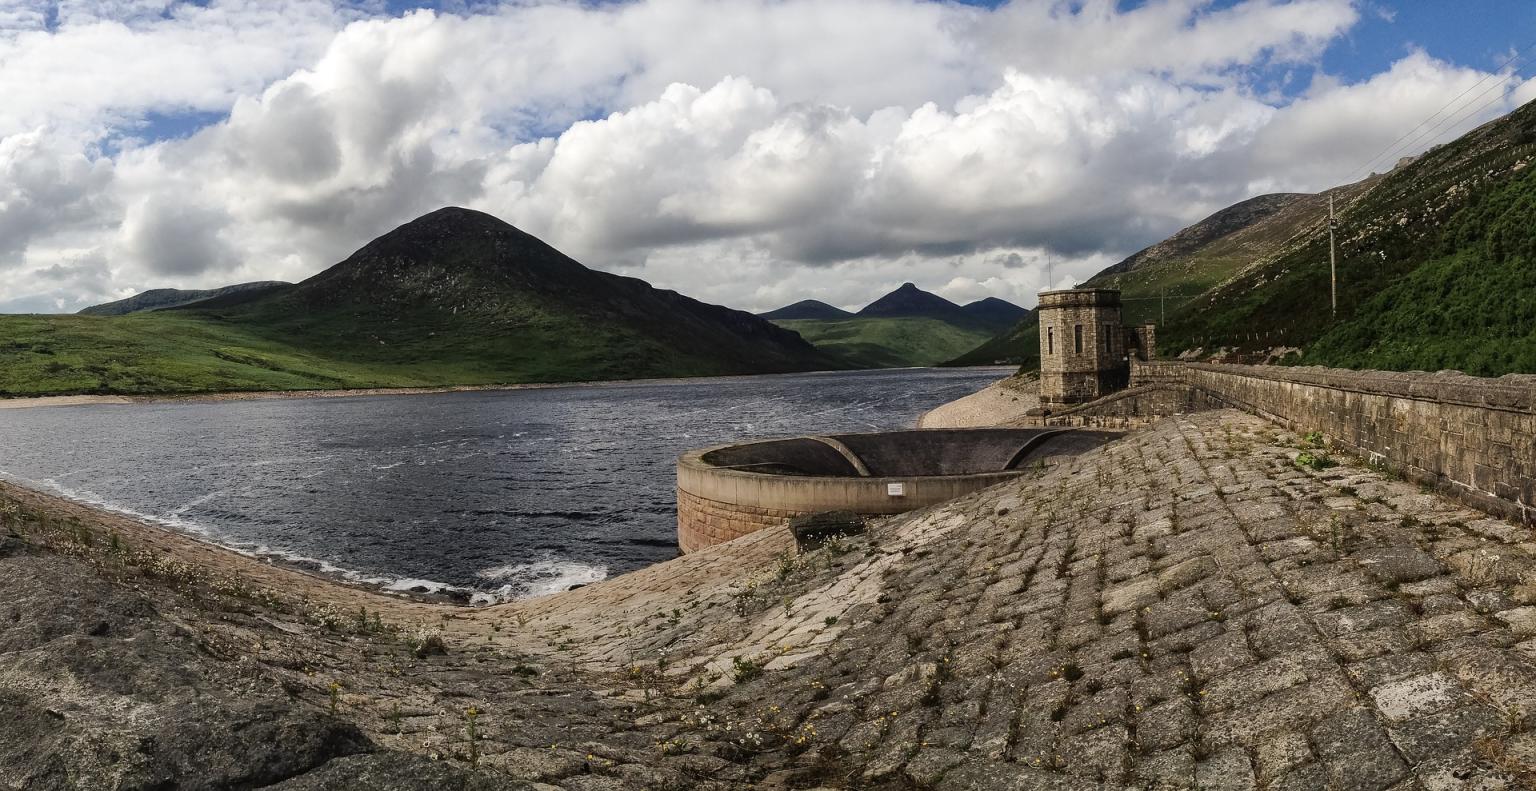 Exposed plughole at Silent Valley Reservoir, Northern Ireland